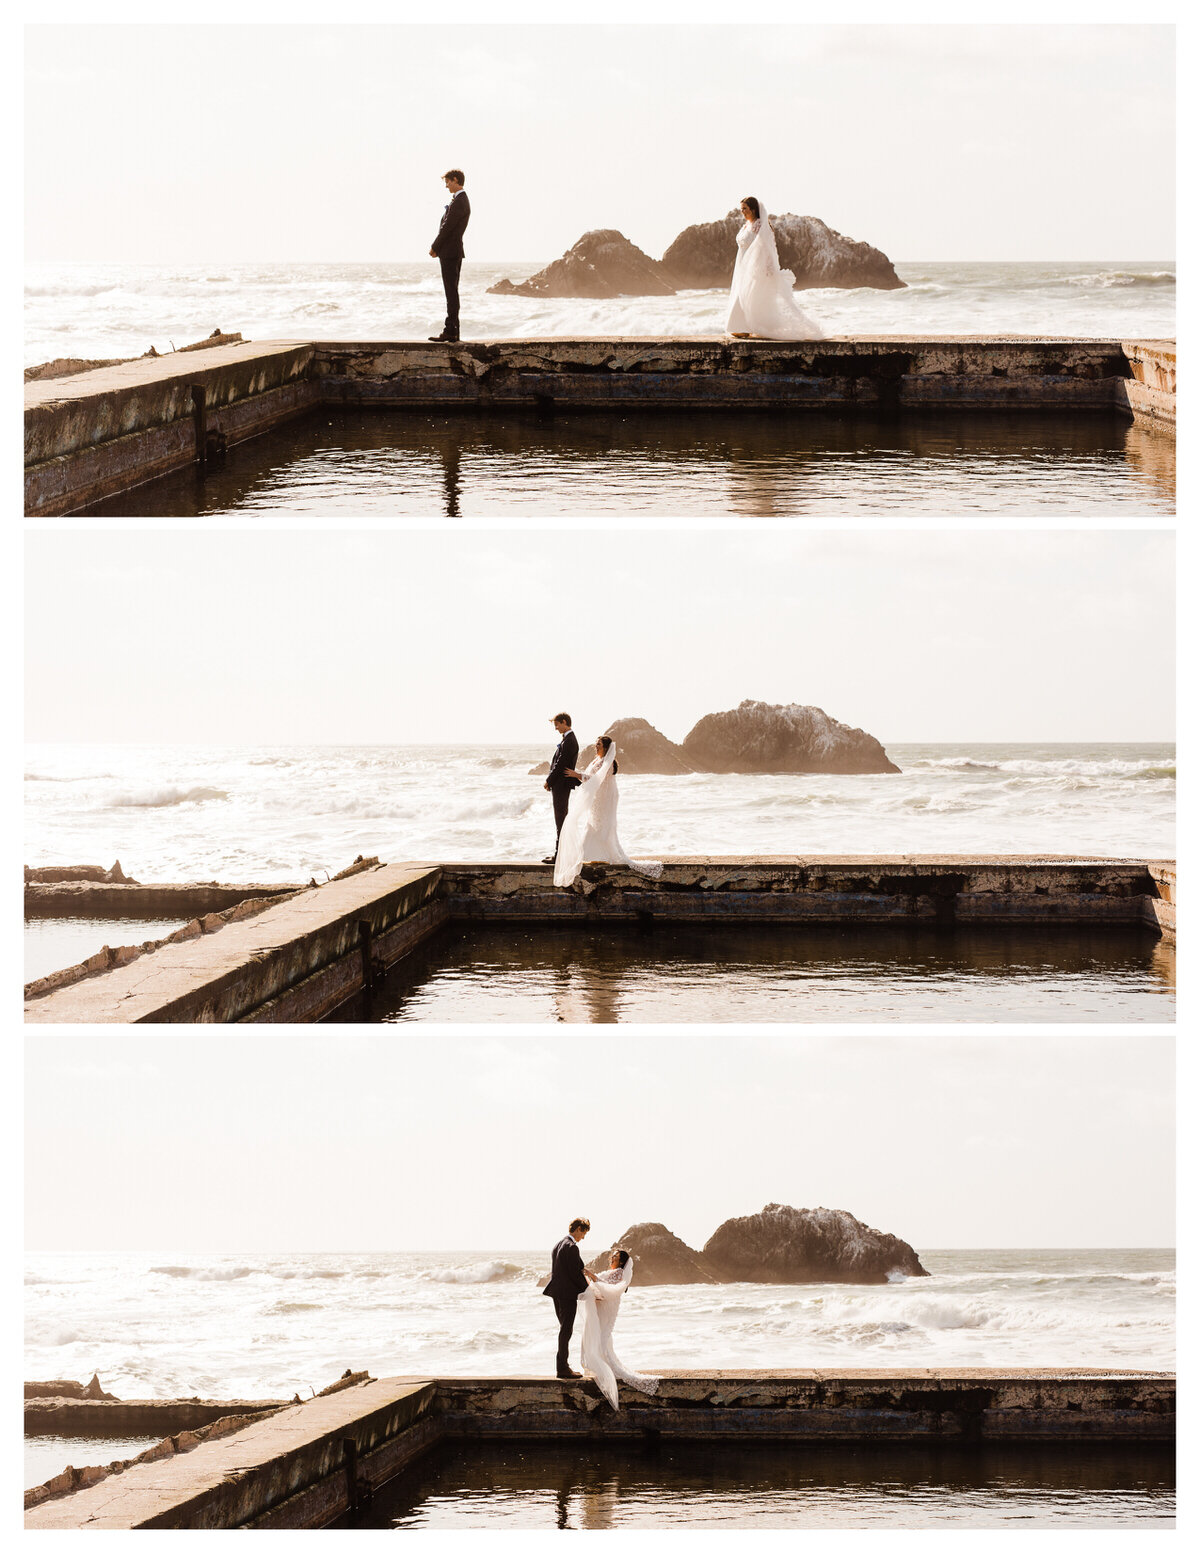 Sutro Baths First Look in San Francisco Elopement - photo by Kept Record | www.keptrecord.com